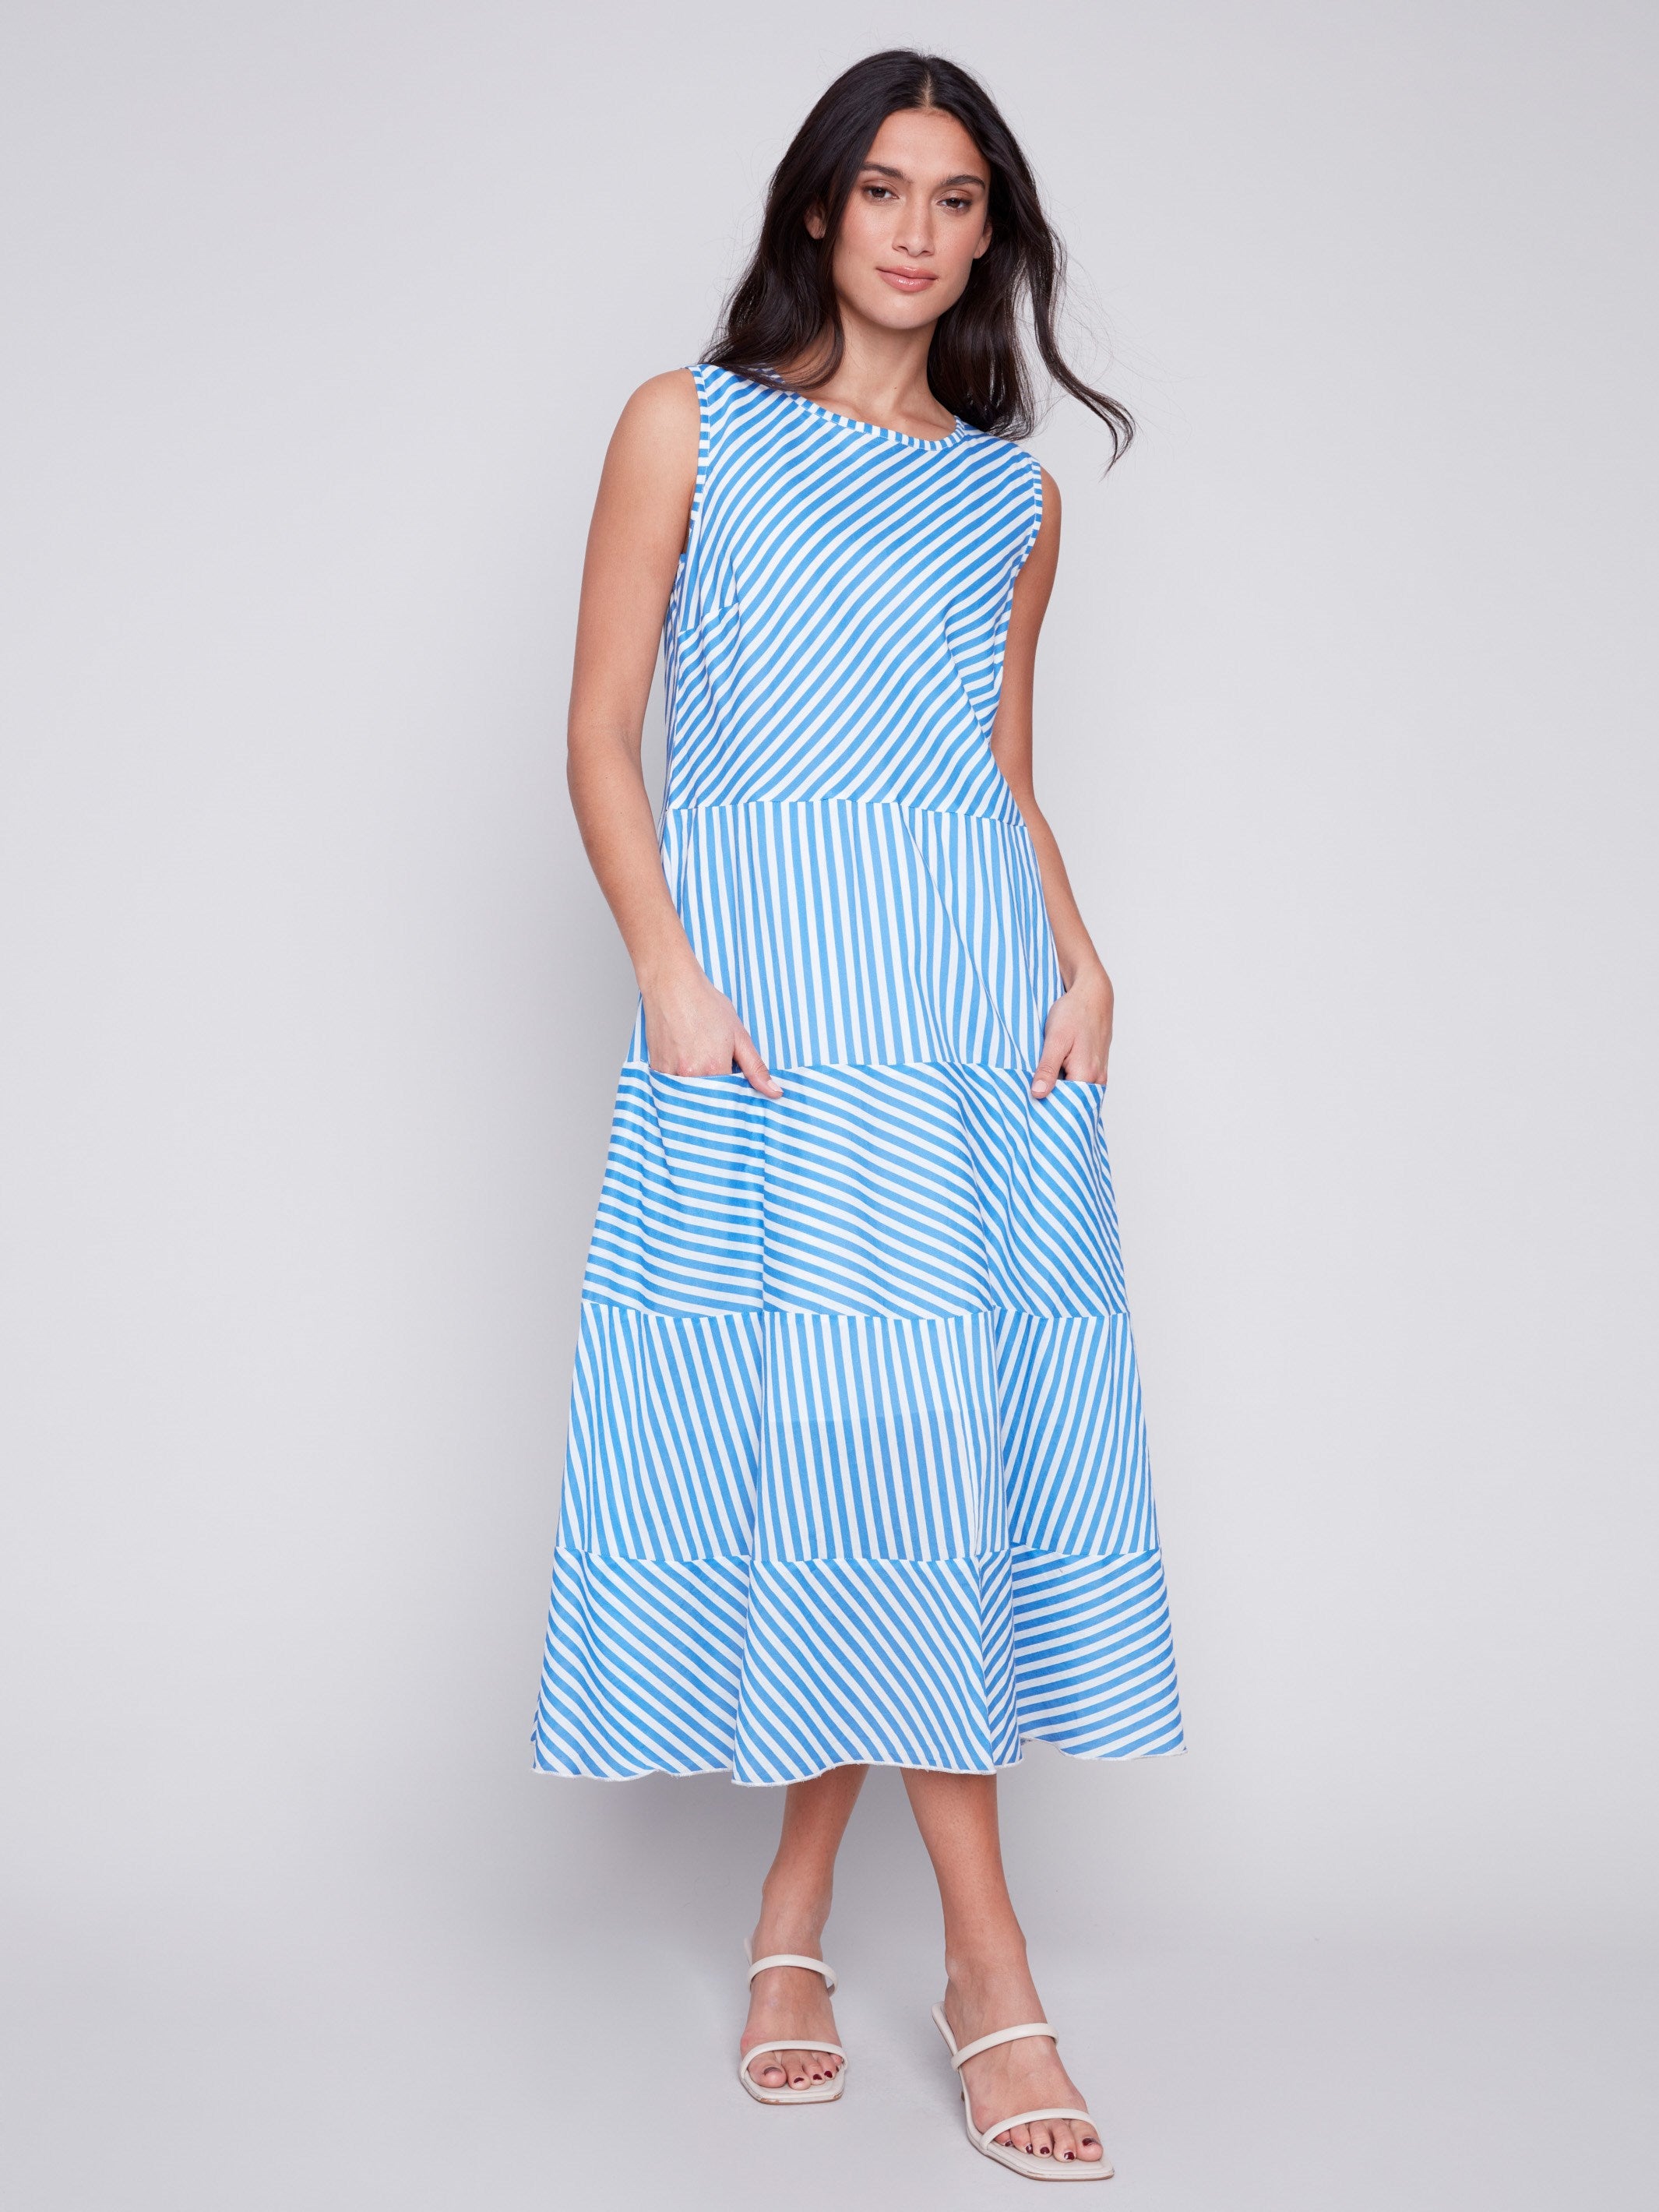 Printed Sleeveless Cotton Voile Dress - Blue - Charlie B Collection Canada - Image 8